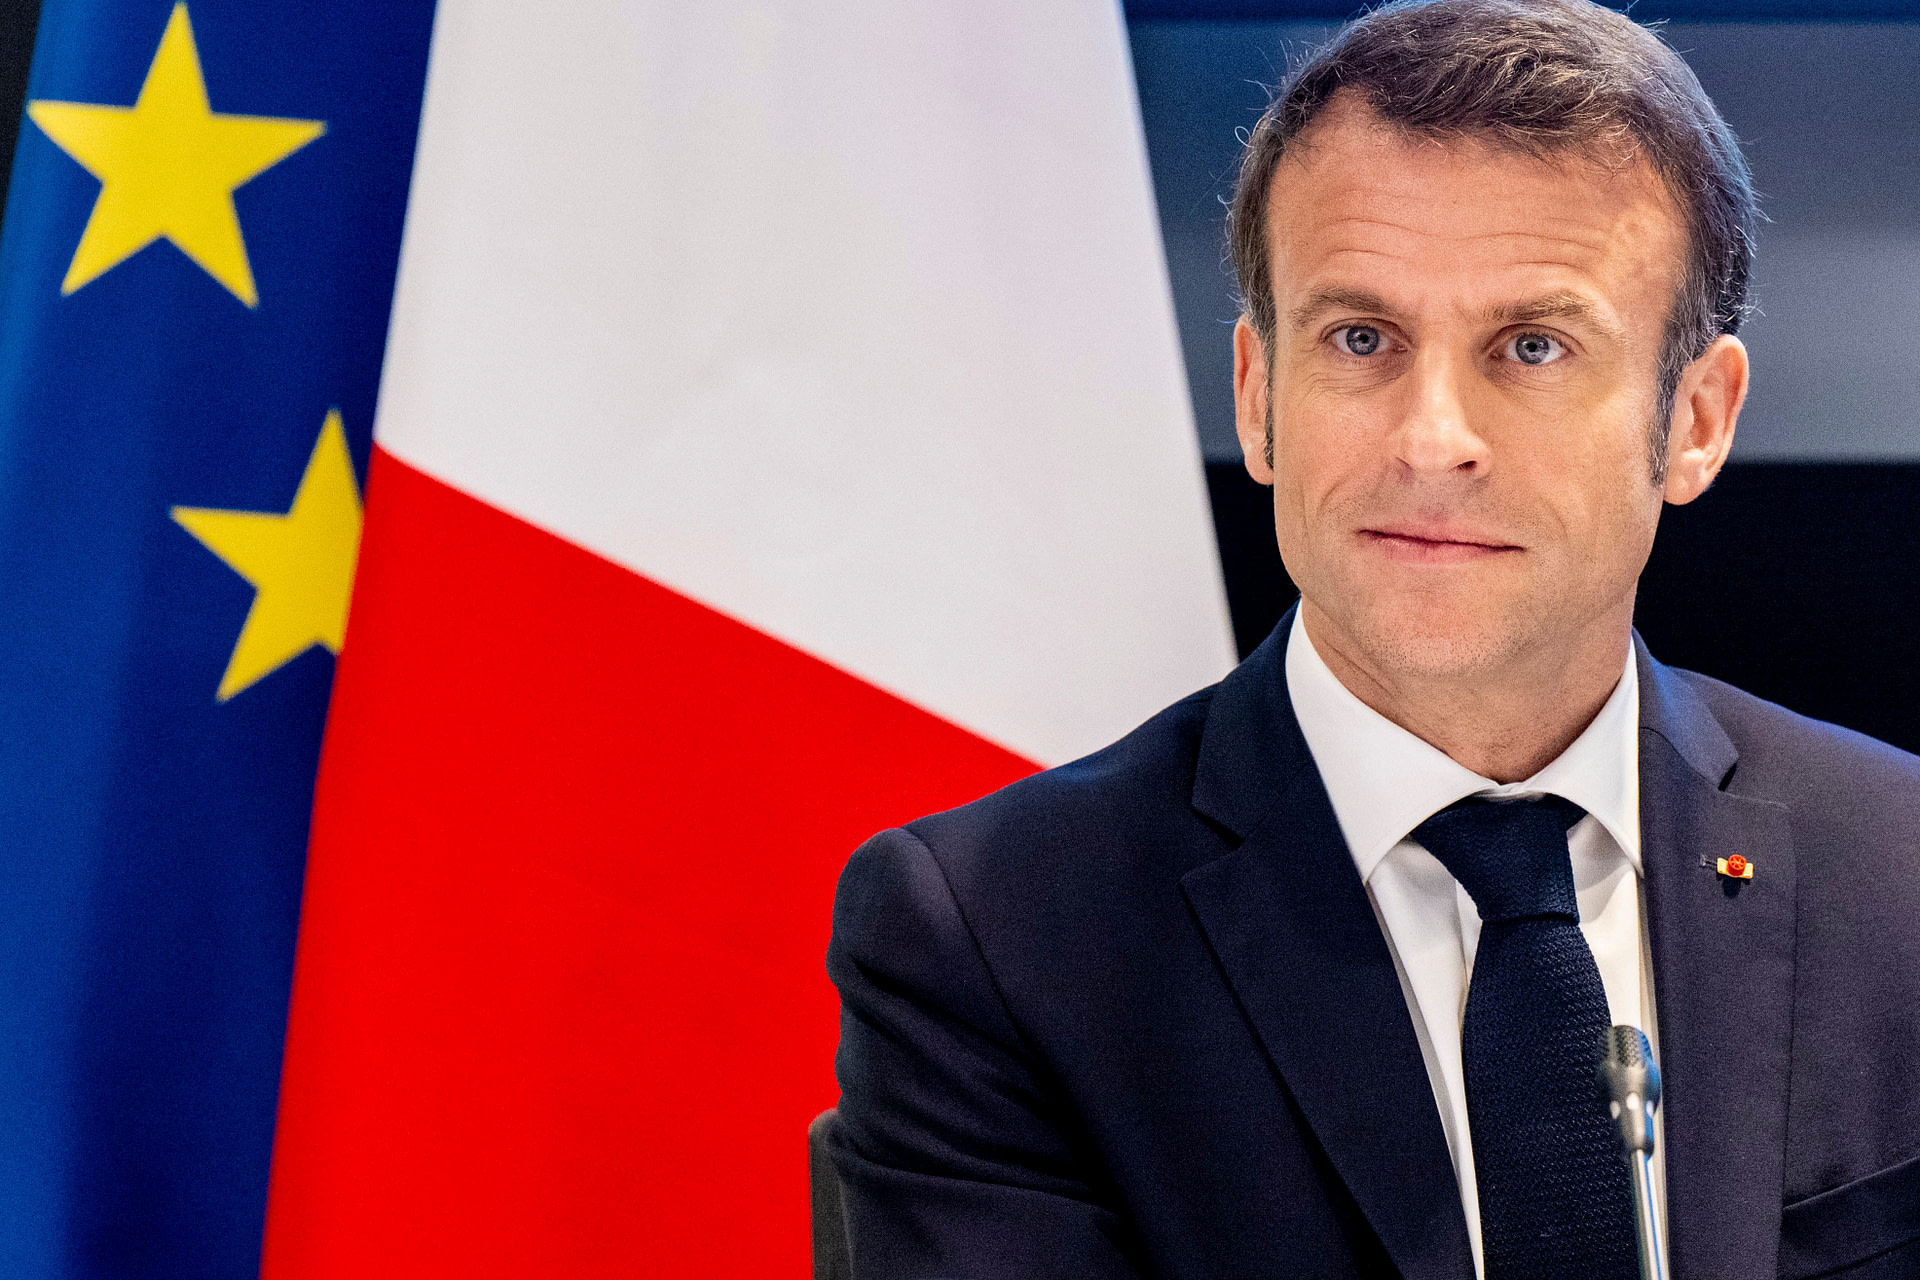 Wagner chief: We’ll rip out Macron’s teeth